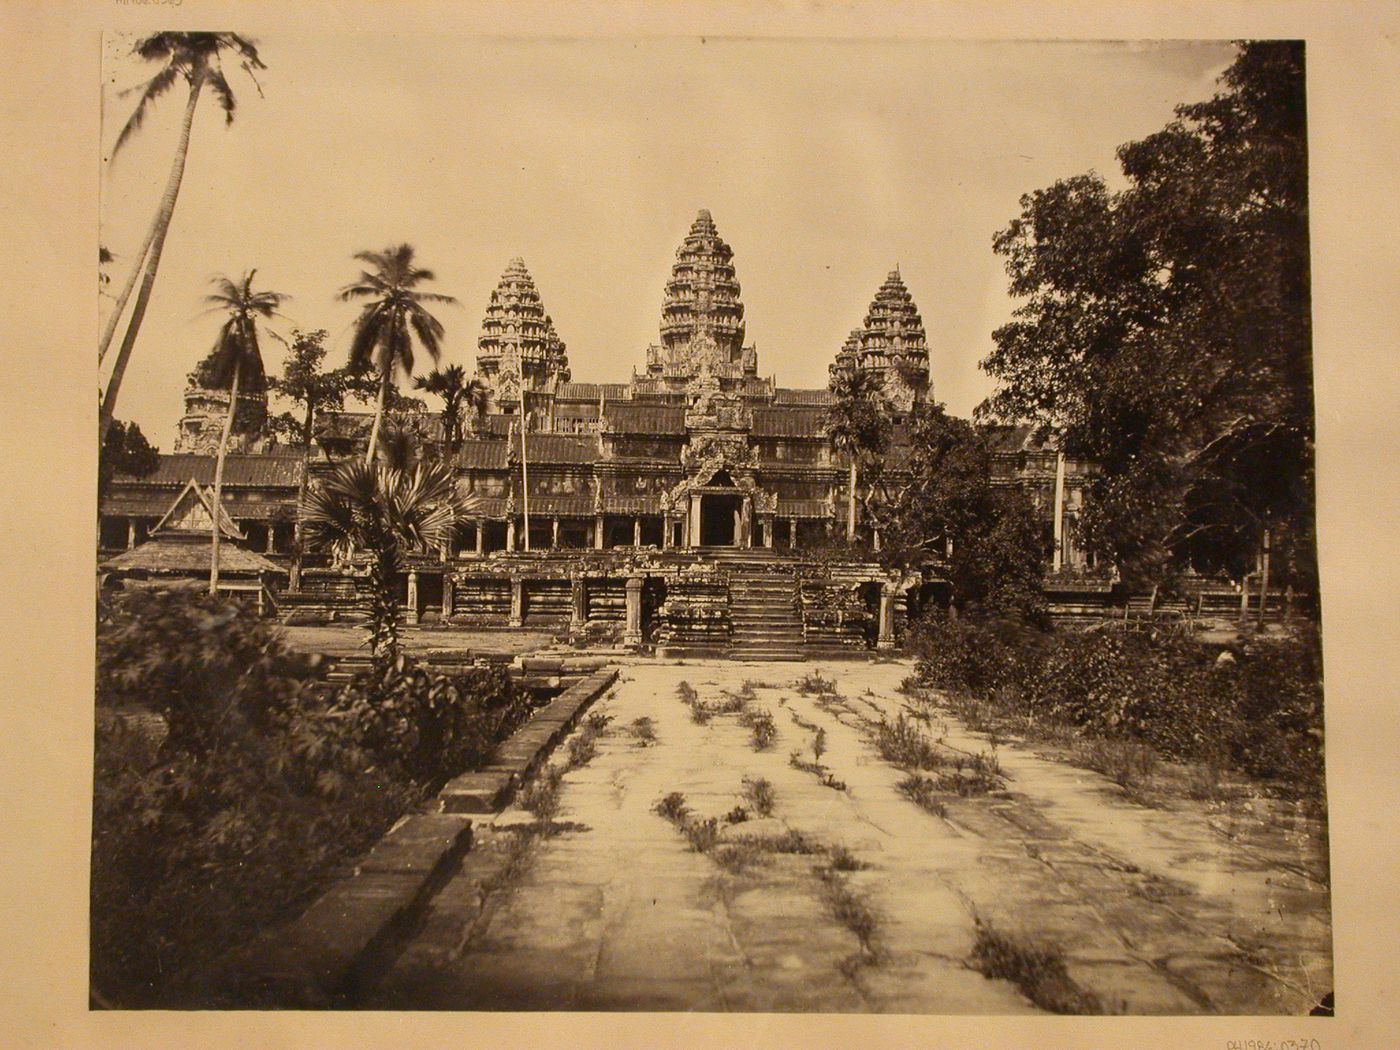 View of the west entrance of the central galleries and the central towers, Angkor Wat, Siam (now in Cambodia)